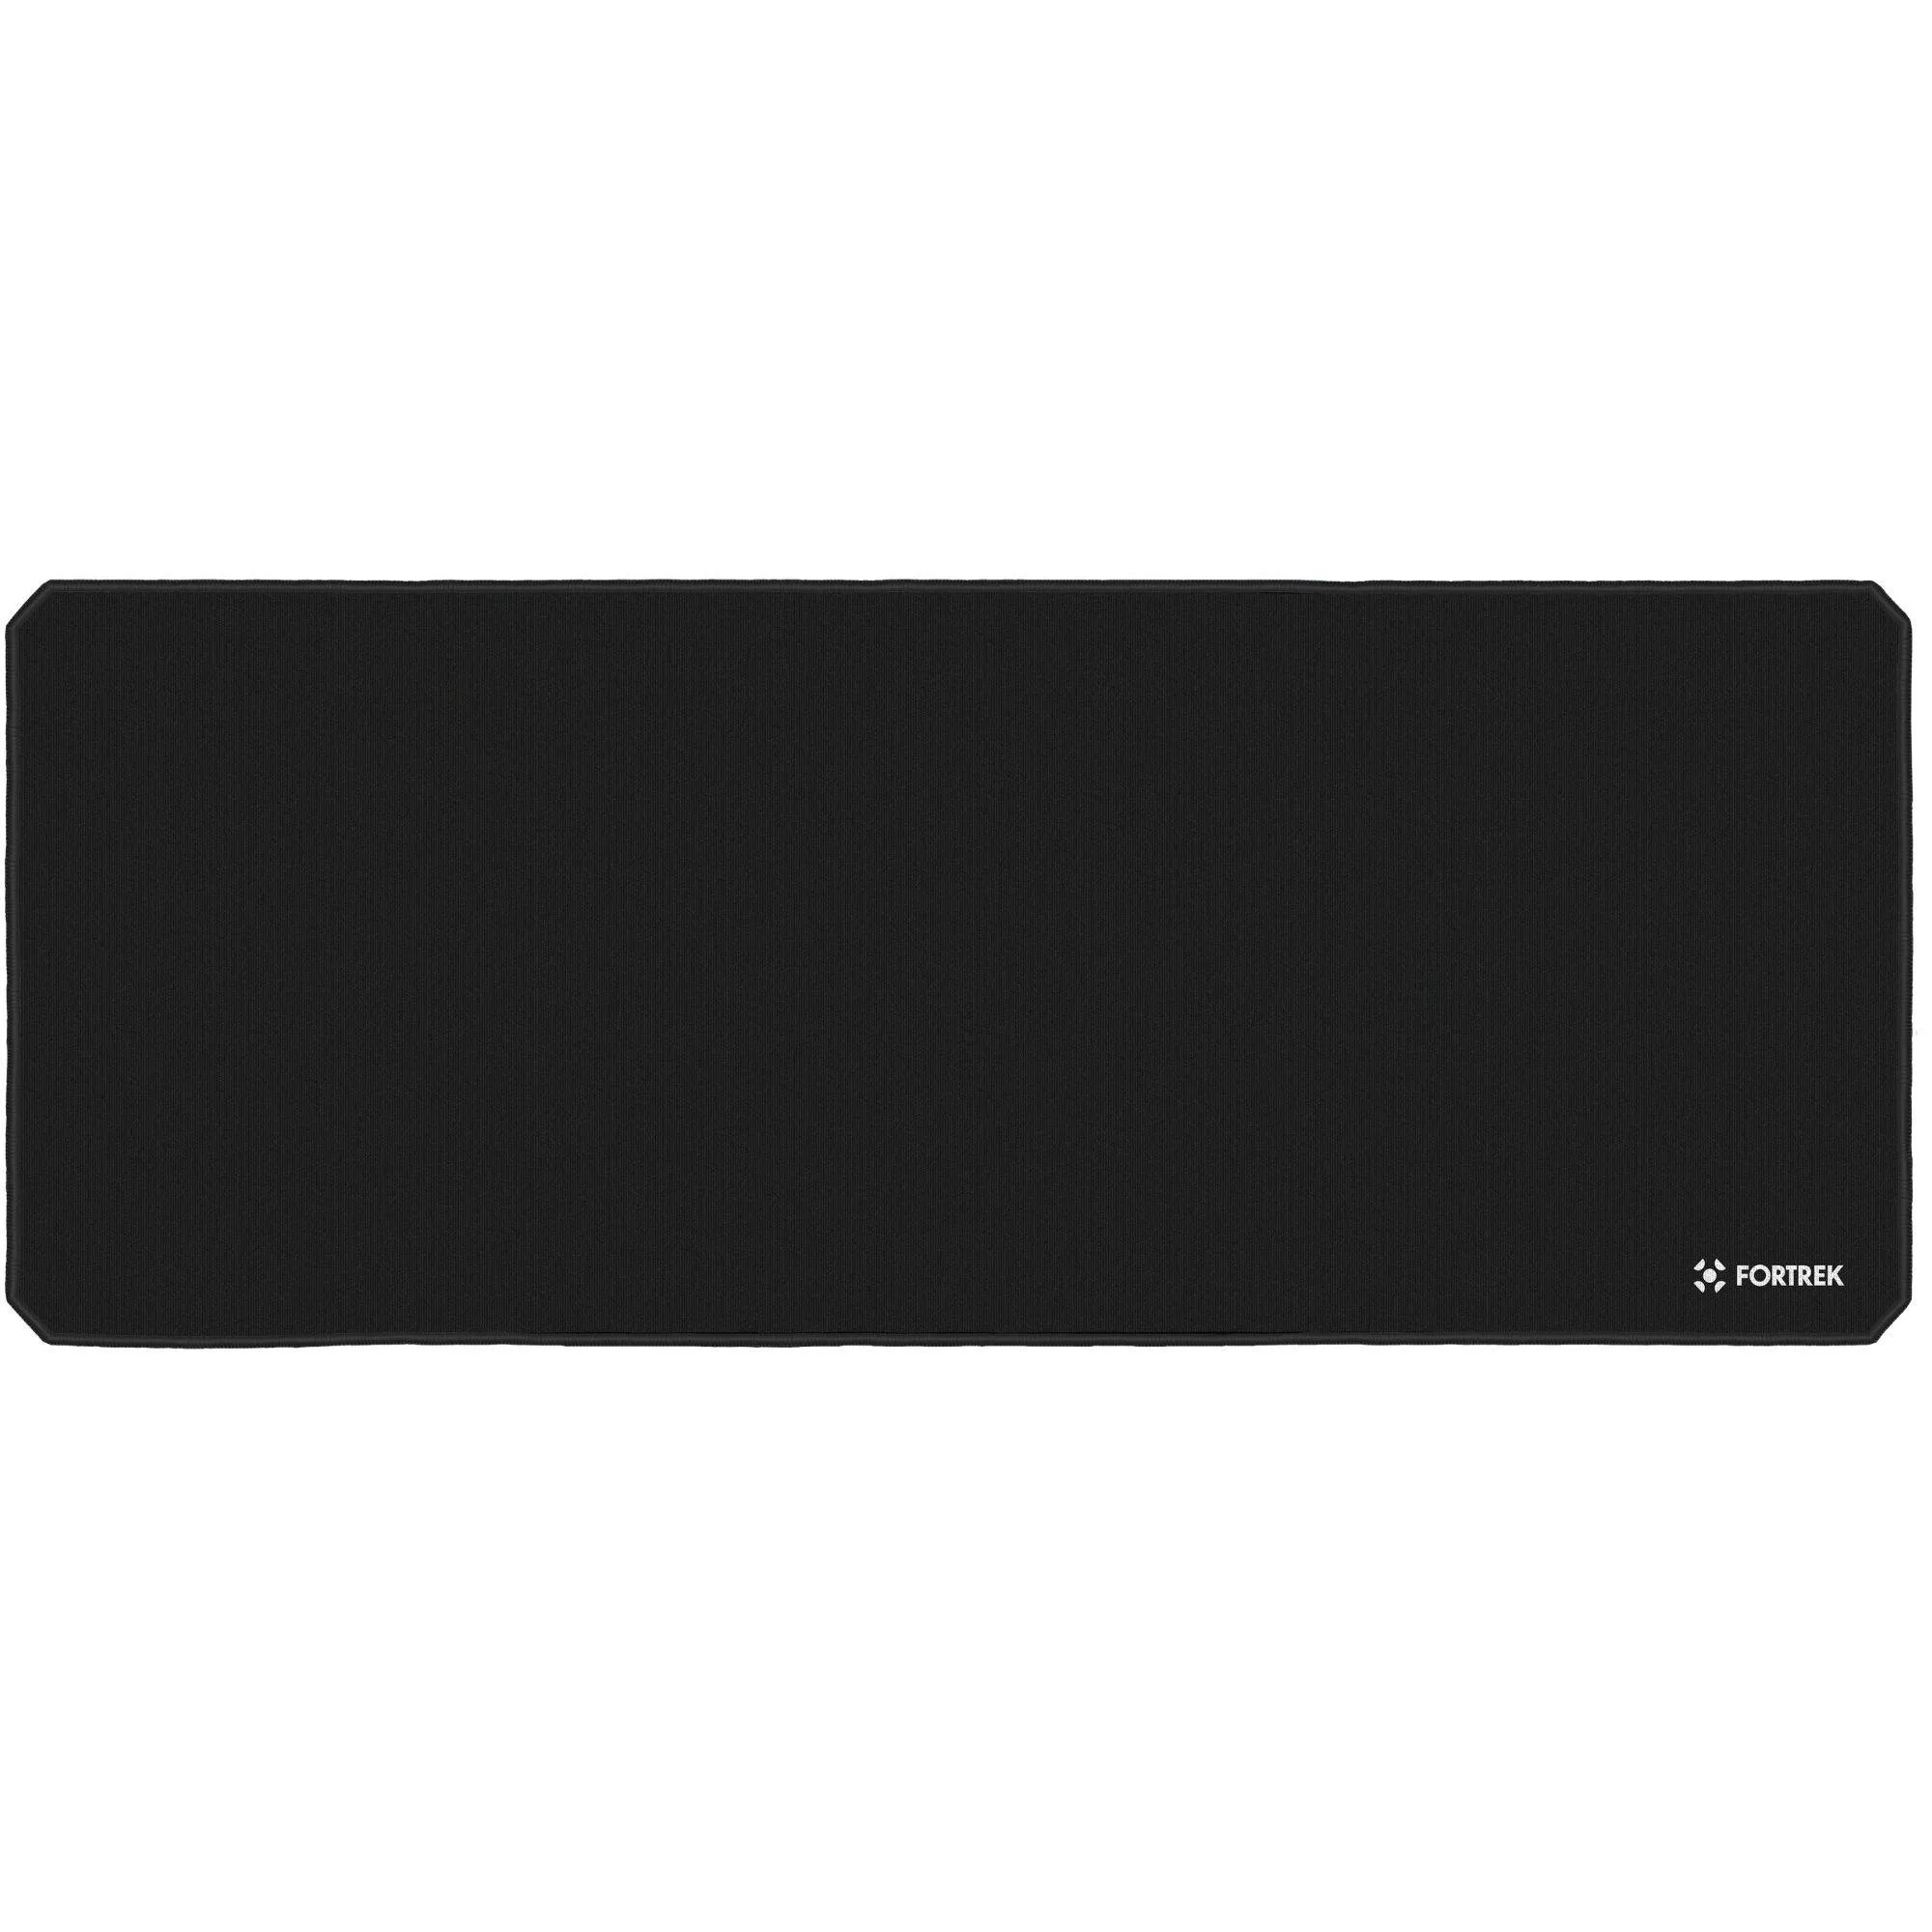 Mouse Pad Gamer Fortrek Speed MPG103 (800x300mm) Preto (77538)